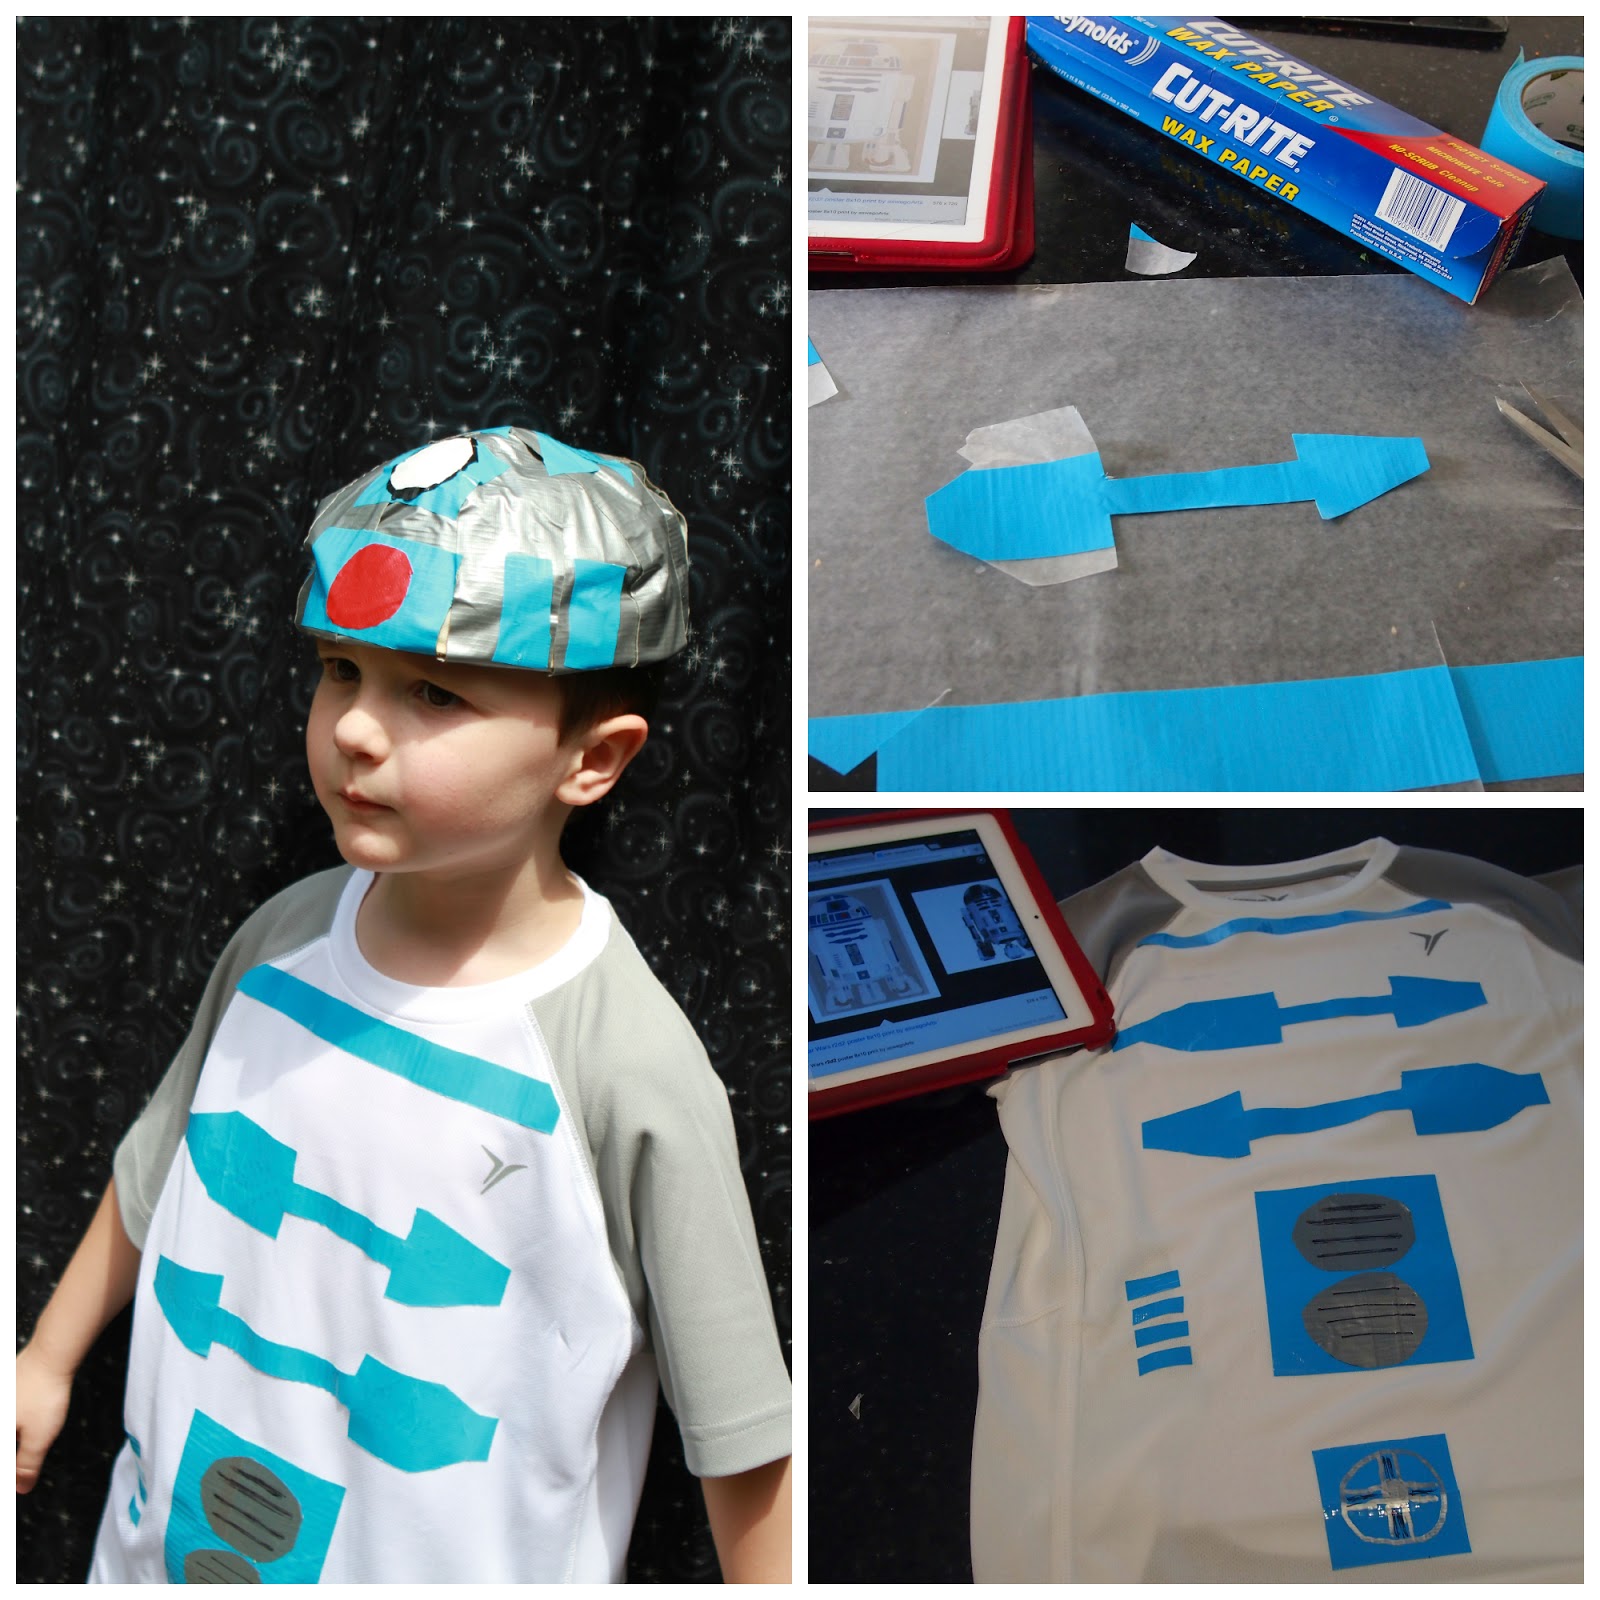 The Twins' Star Wars Birthday Party: Part 1 #StarWars Costumes